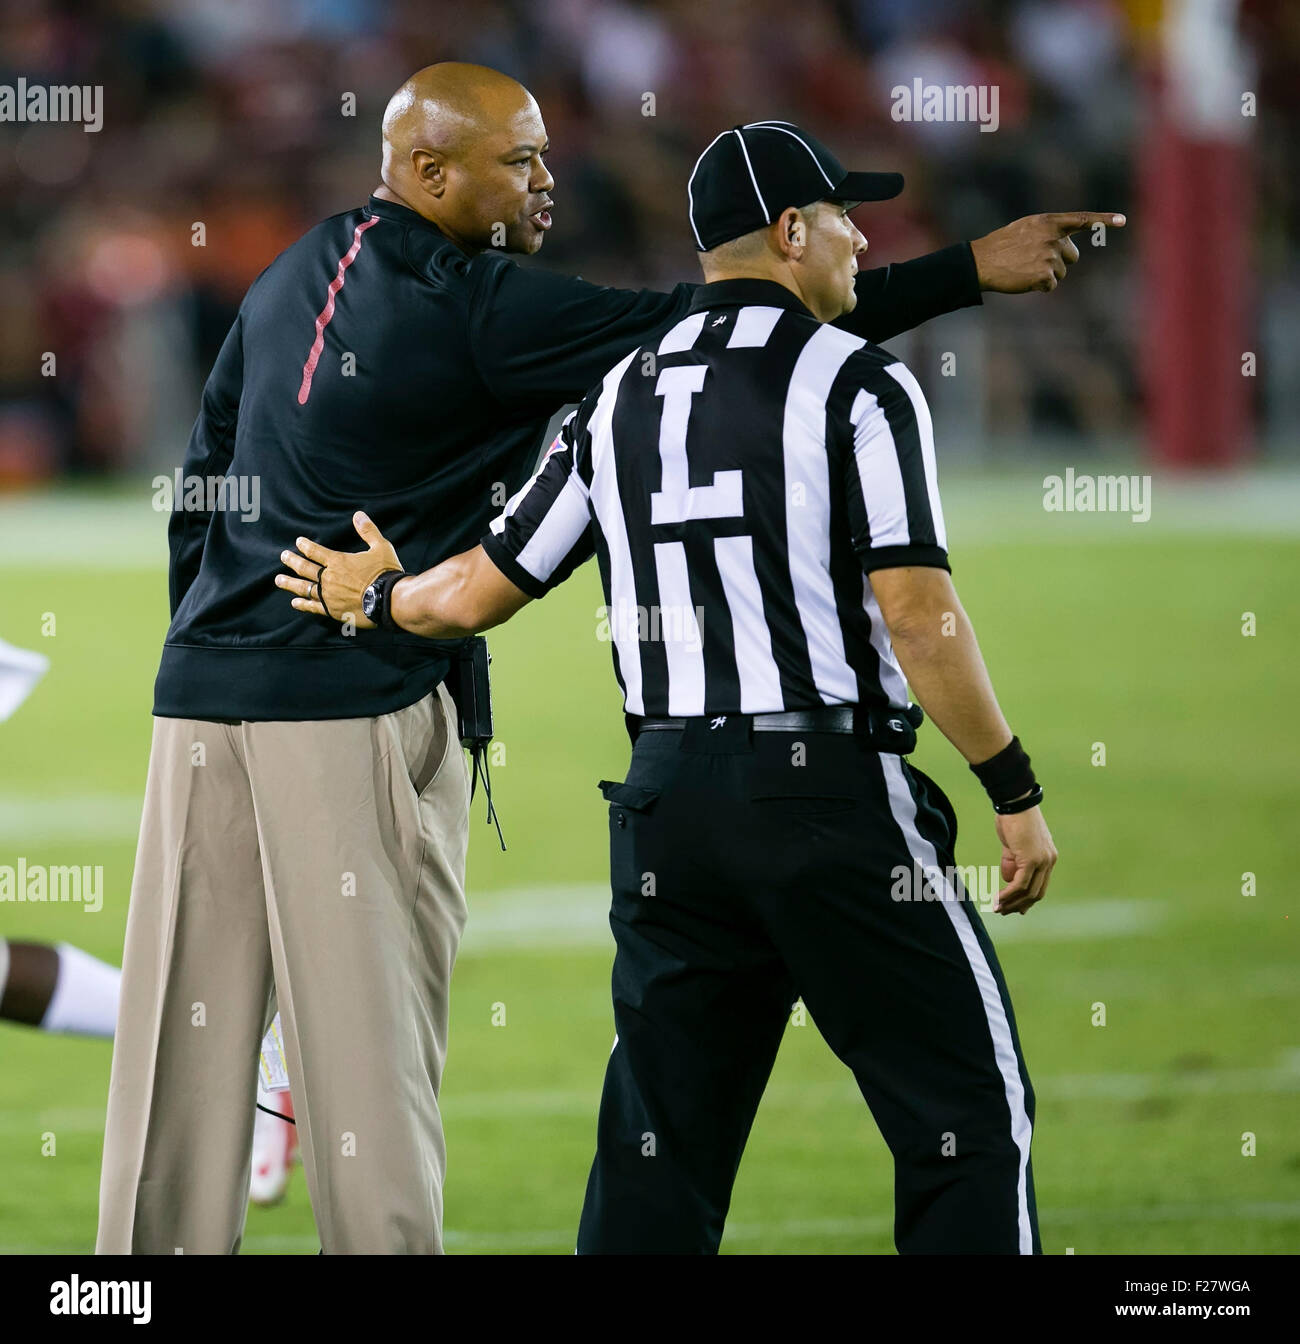 Palo Alto, CA. 12th Sep, 2015. Stanford Cardinal head coach David Shaw confers with an official during the NCAA Football game between the Stanford Cardinal and the UCF Knights at Stanford Stadium in Palo Alto, CA. Stanford defeated UCF 31-7. Damon Tarver/Cal Sport Media/Alamy Live News Stock Photo